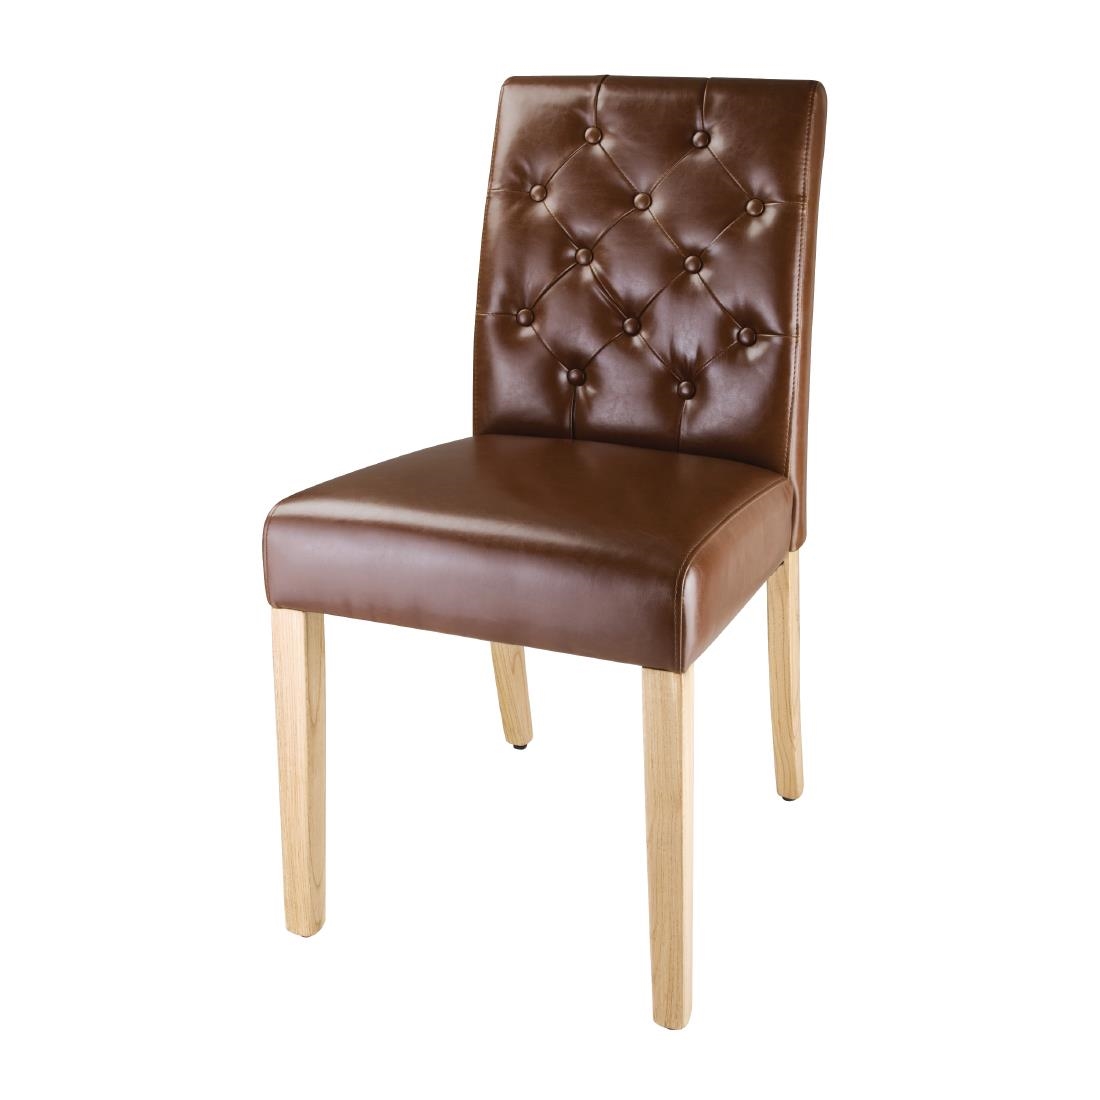 Bolero Chiswick Button Dining Chairs Tan Leather (Pack of 2)